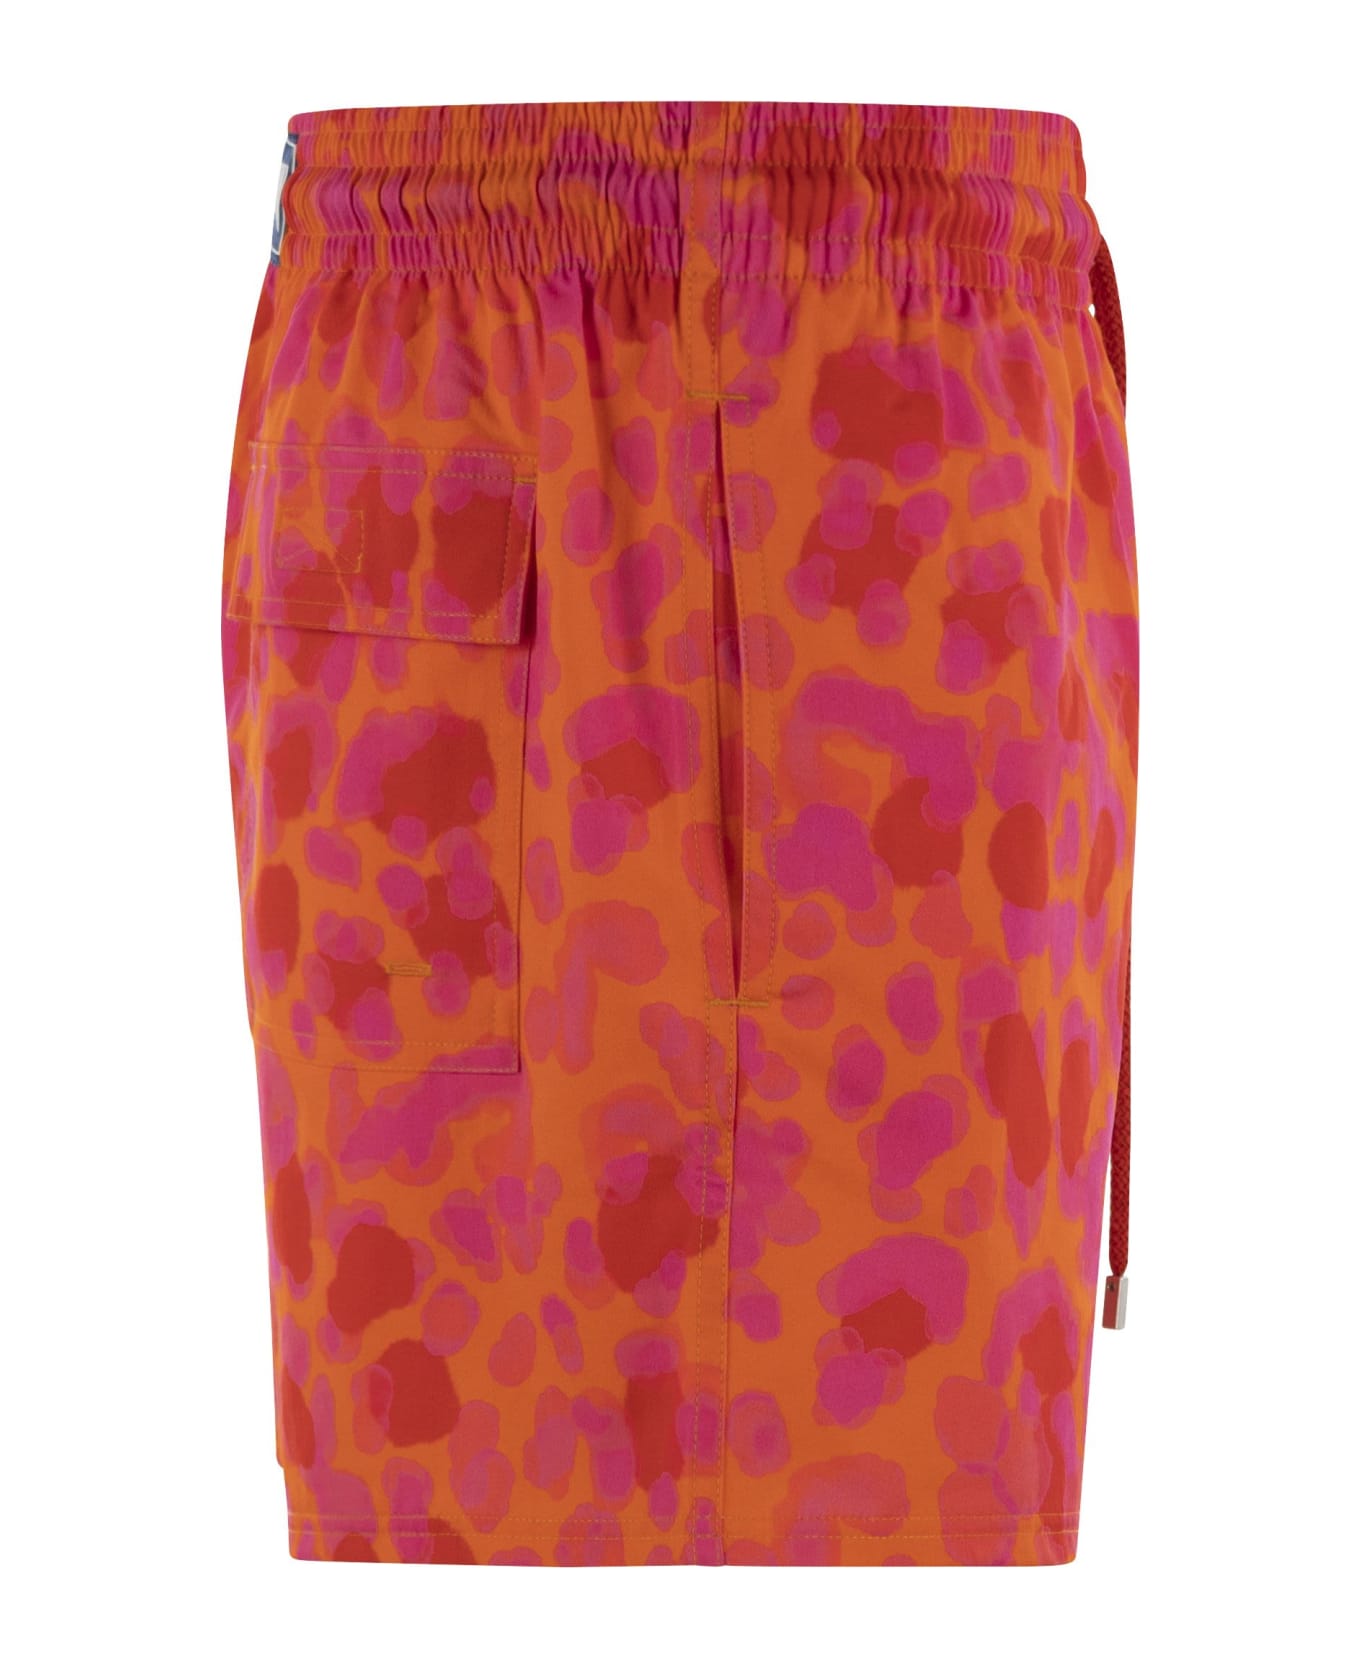 Vilebrequin Stretch Beach Shorts With Patterned Print - Orange